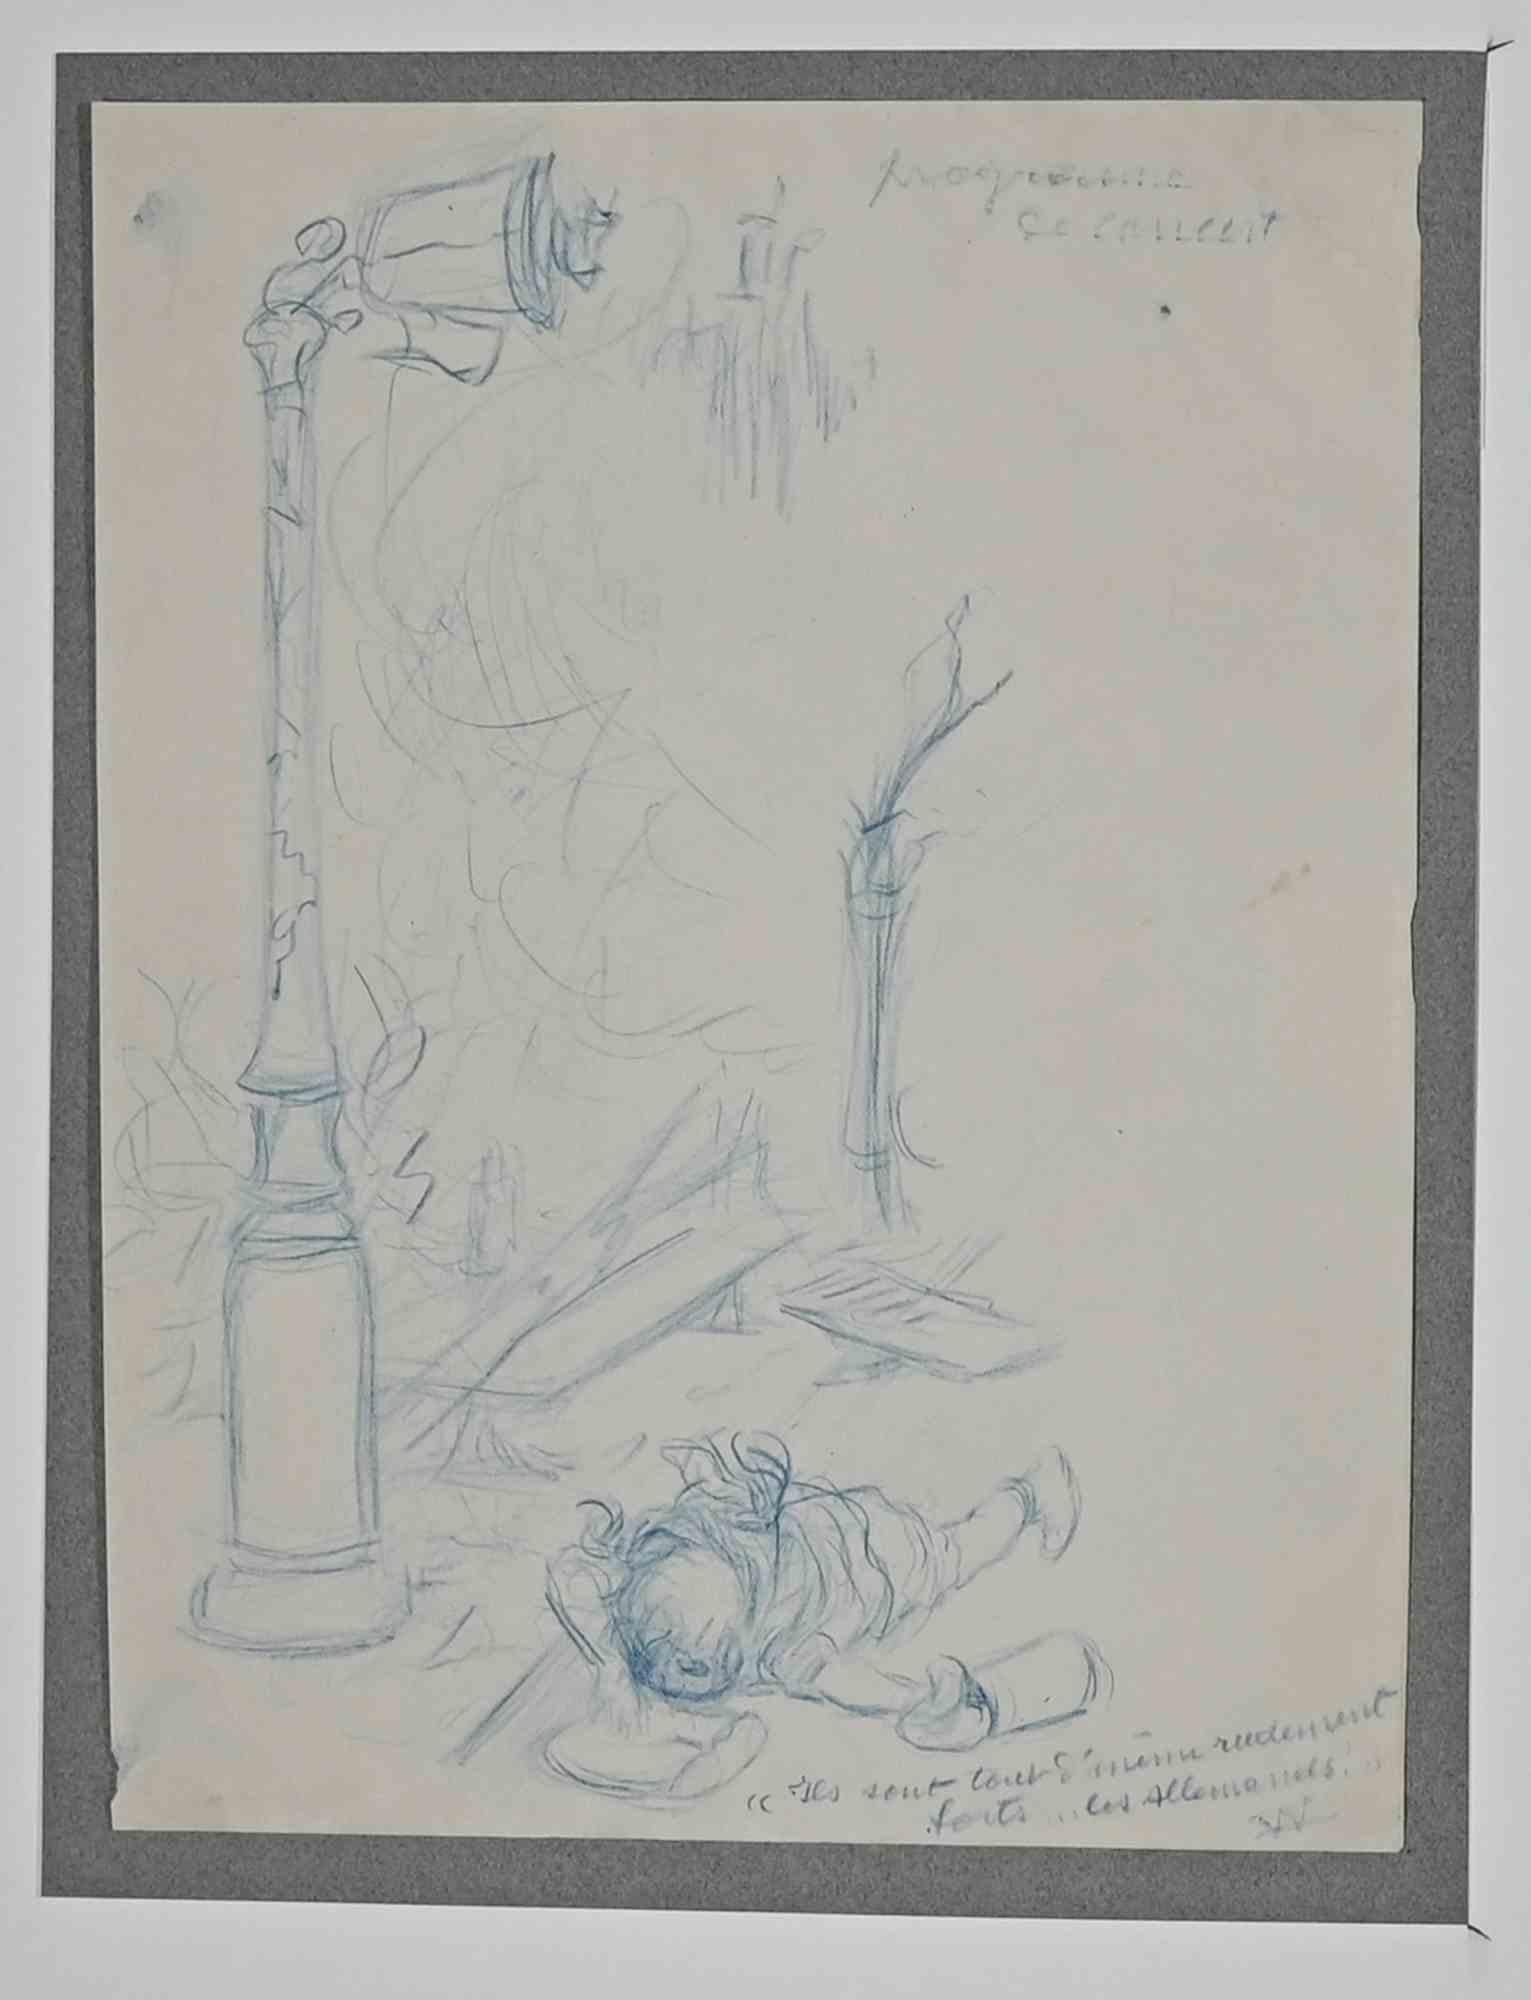 Programme de Concert - Drawing by Adolphe Willette - Late-19th century 